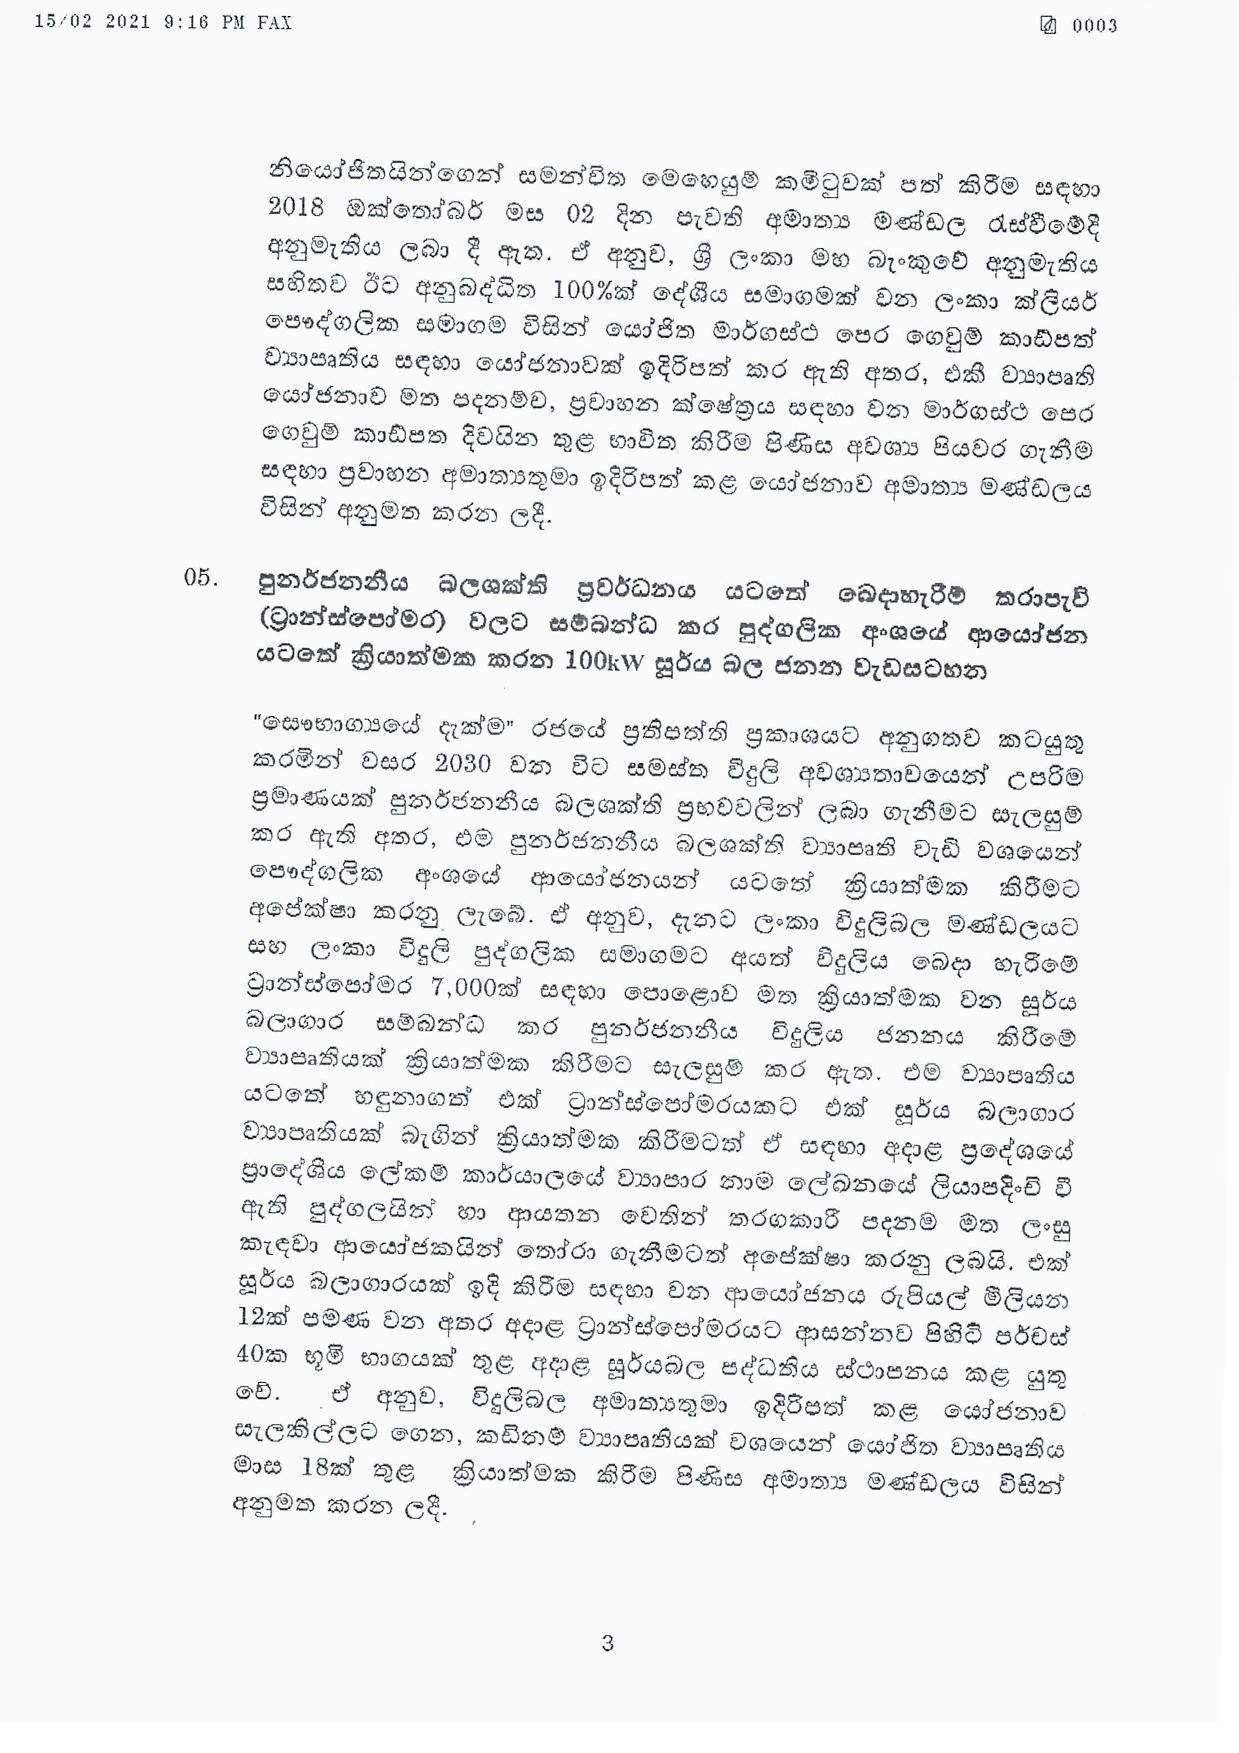 Cabinet Decision on 15.02.2021 page 003